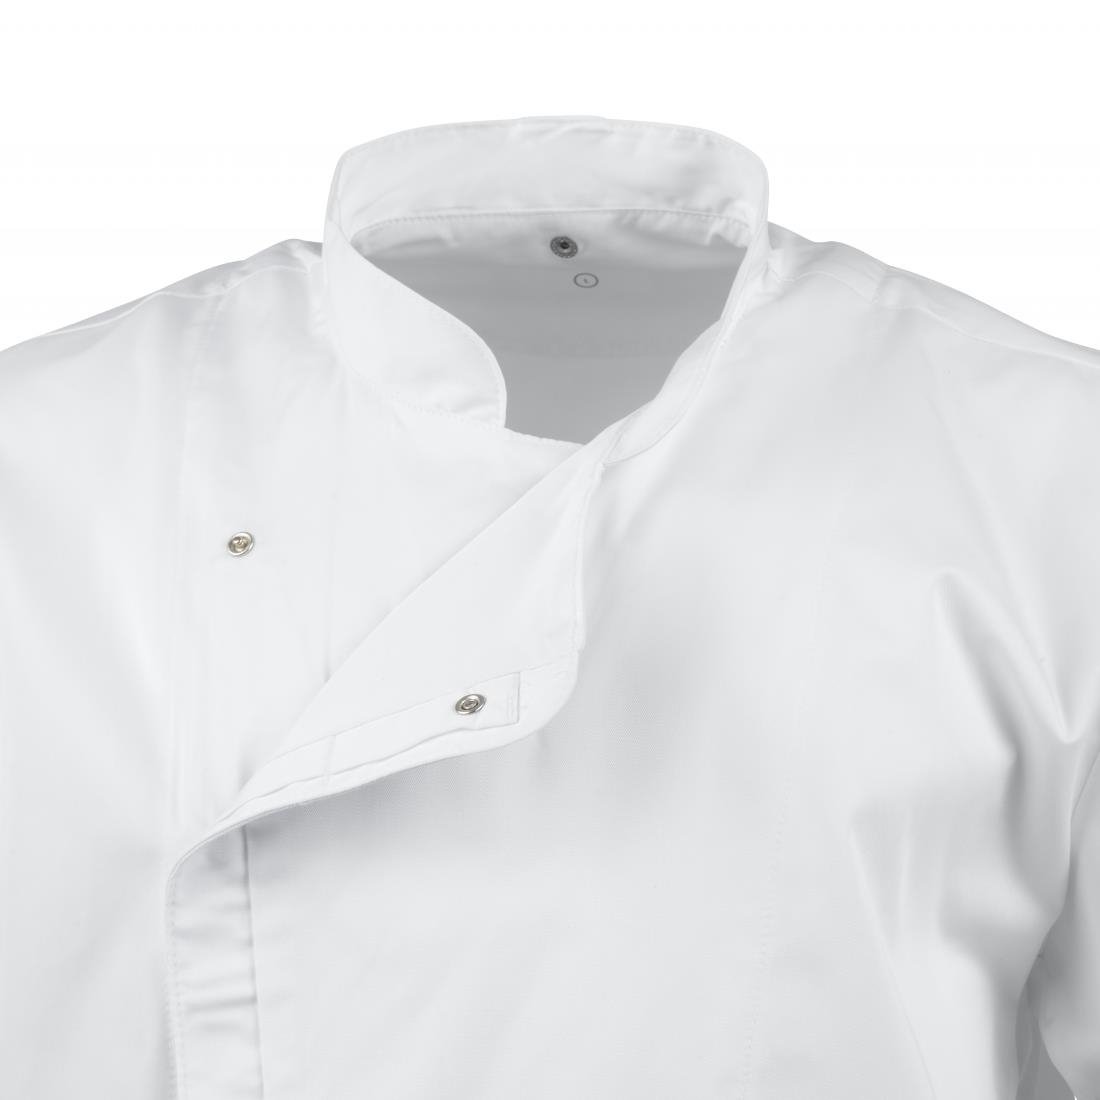 BB669-XXL Chef Works Cannes Short Sleeve Chefs Jacket Size XXL JD Catering Equipment Solutions Ltd